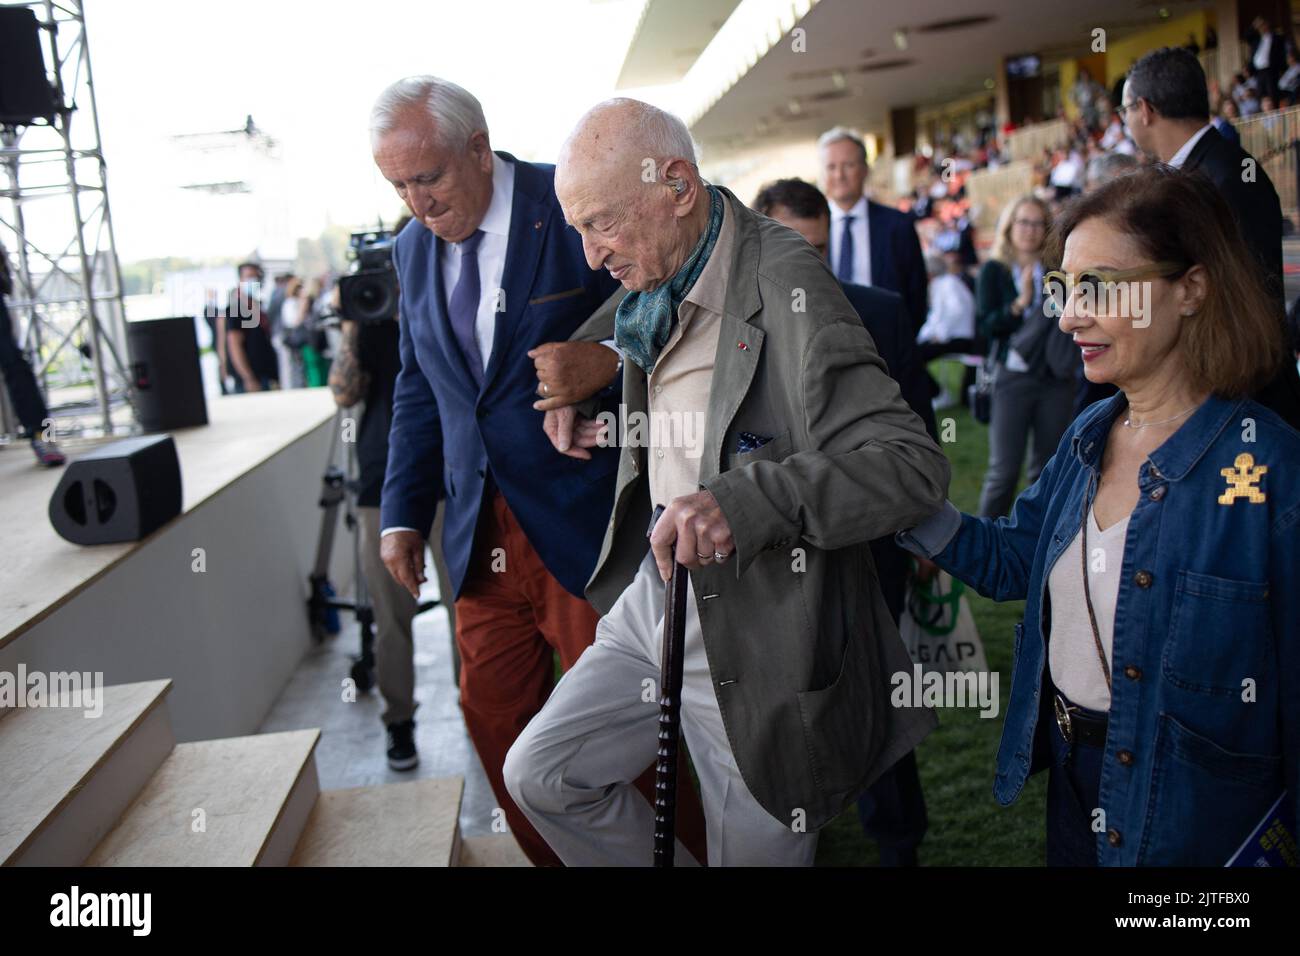 French Sociologist and Philosopher Edgar Morin and Former Prime Minister Jean-Pierre Raffarin arrives to attend the French employers association Medef summer conference La REF 2022 at the Hippodrome de Longchamp racetrack in Paris on August 30, 2022. Photo by Raphael Lafargue/ABACAPRESS.COM Stock Photo